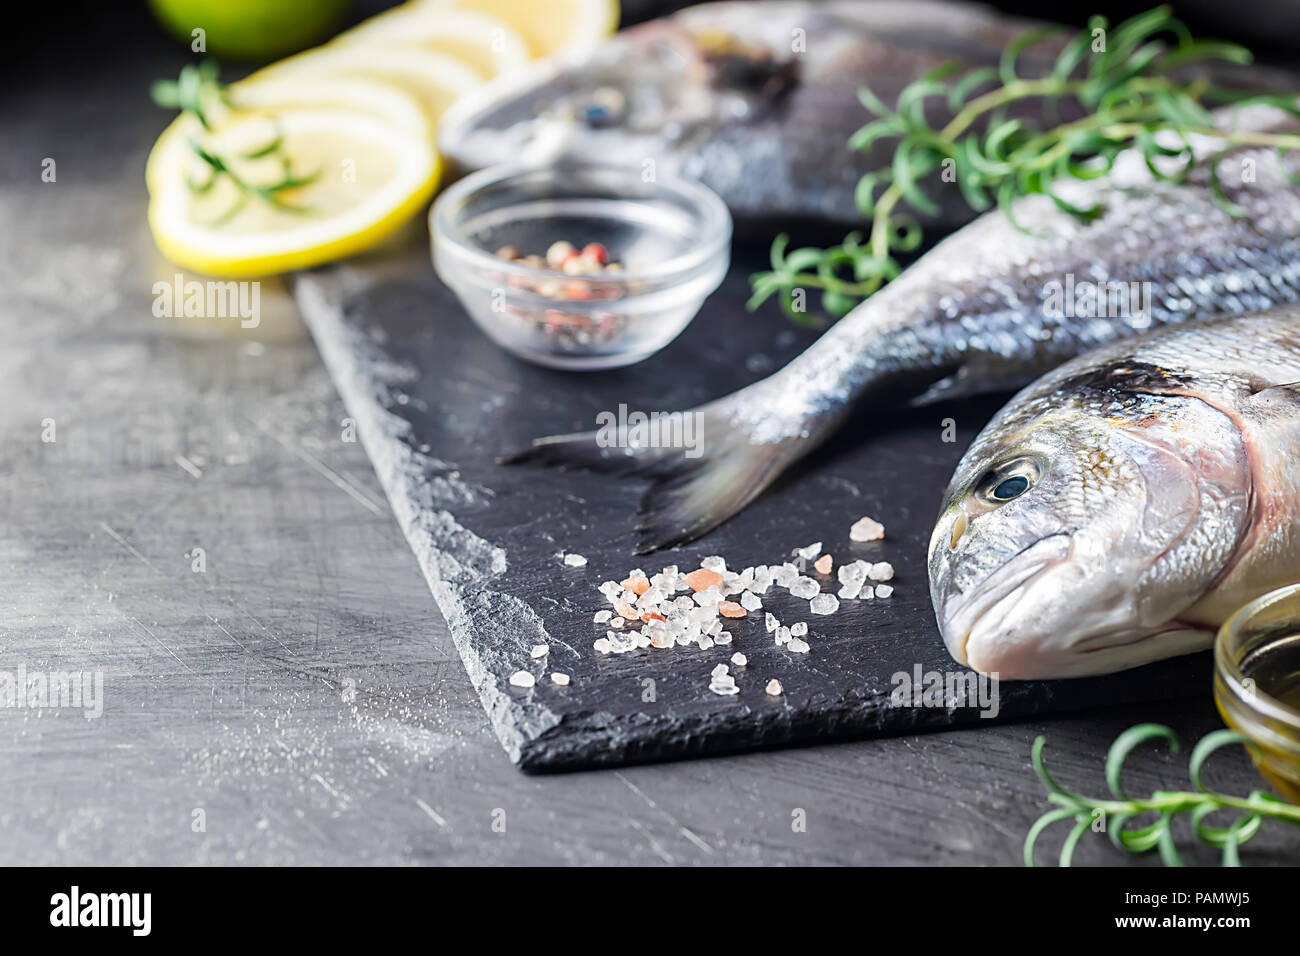 Fresh uncooked dorado or sea bream fish with lemon slices, spices and herbs. Mediterranean cuisine. Top view Stock Photo